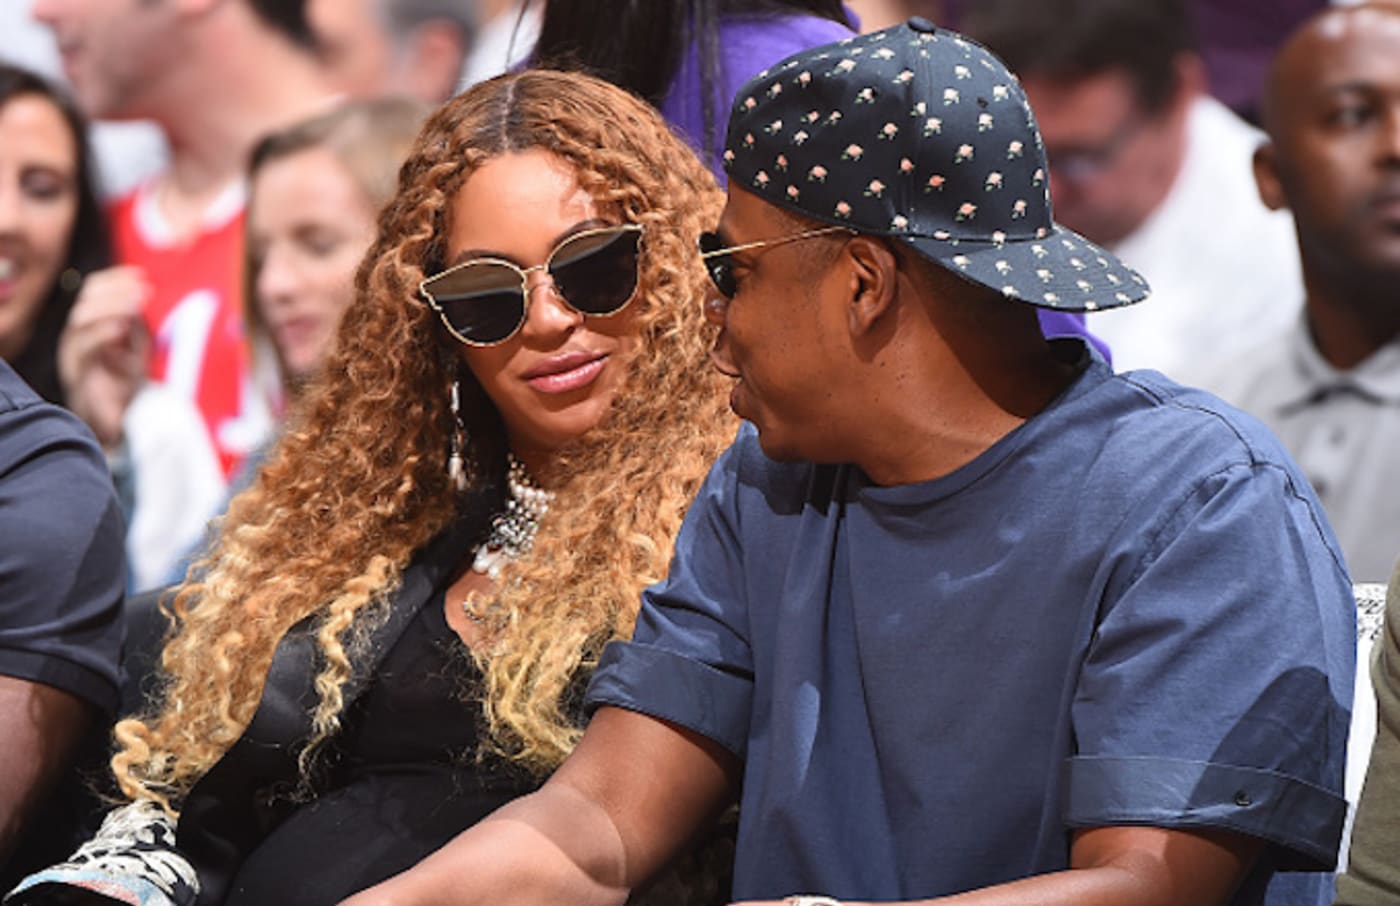 Singer, Beyonce and Rapper, Jay Z attend Game Seven of the Western Conference Quarterfinals